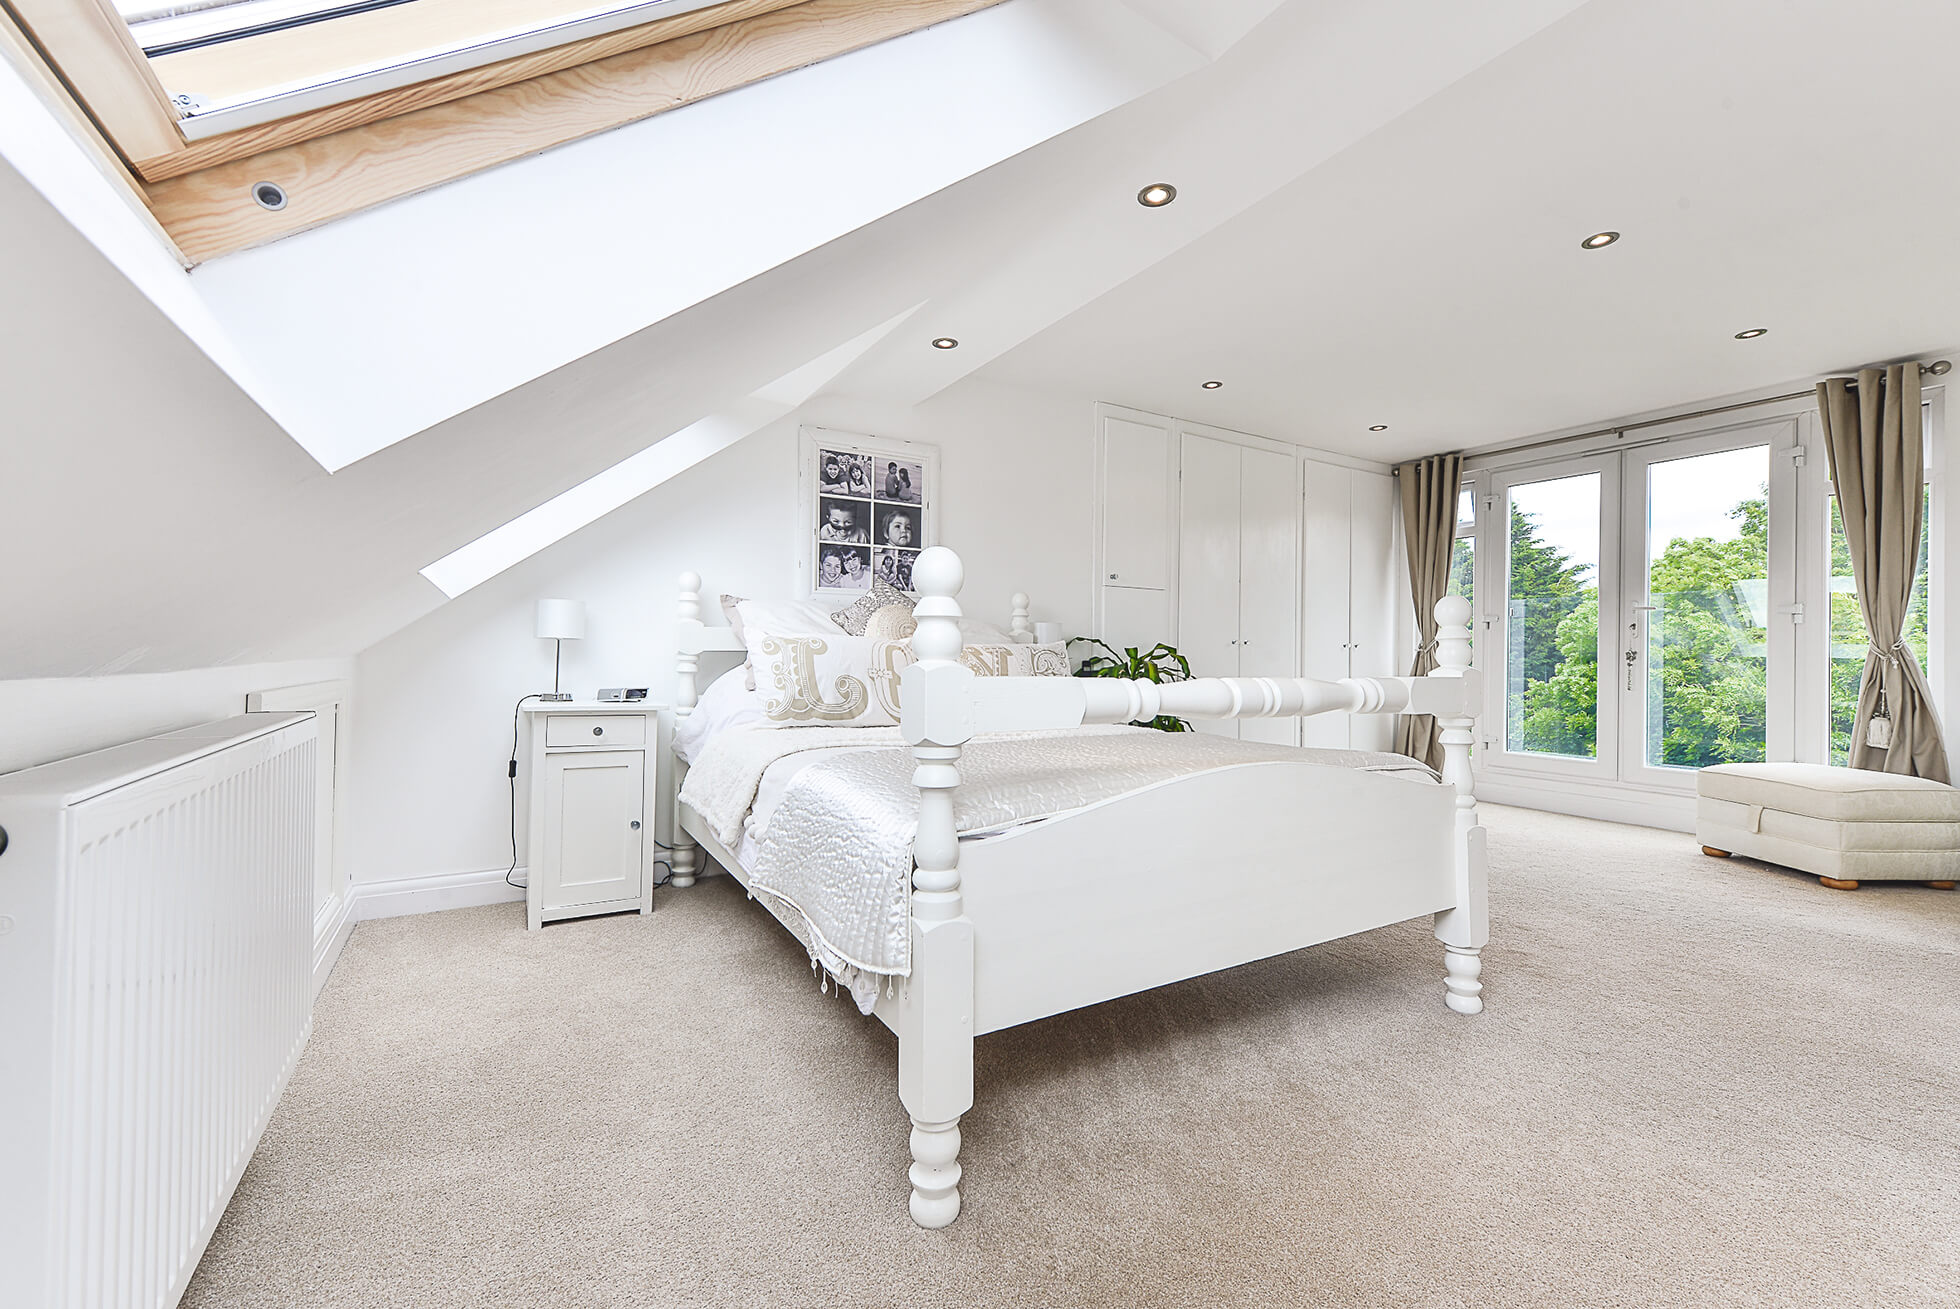 Do you have a question about converting your Loft in High Cross? Here are the most popular questions asked by our clients.